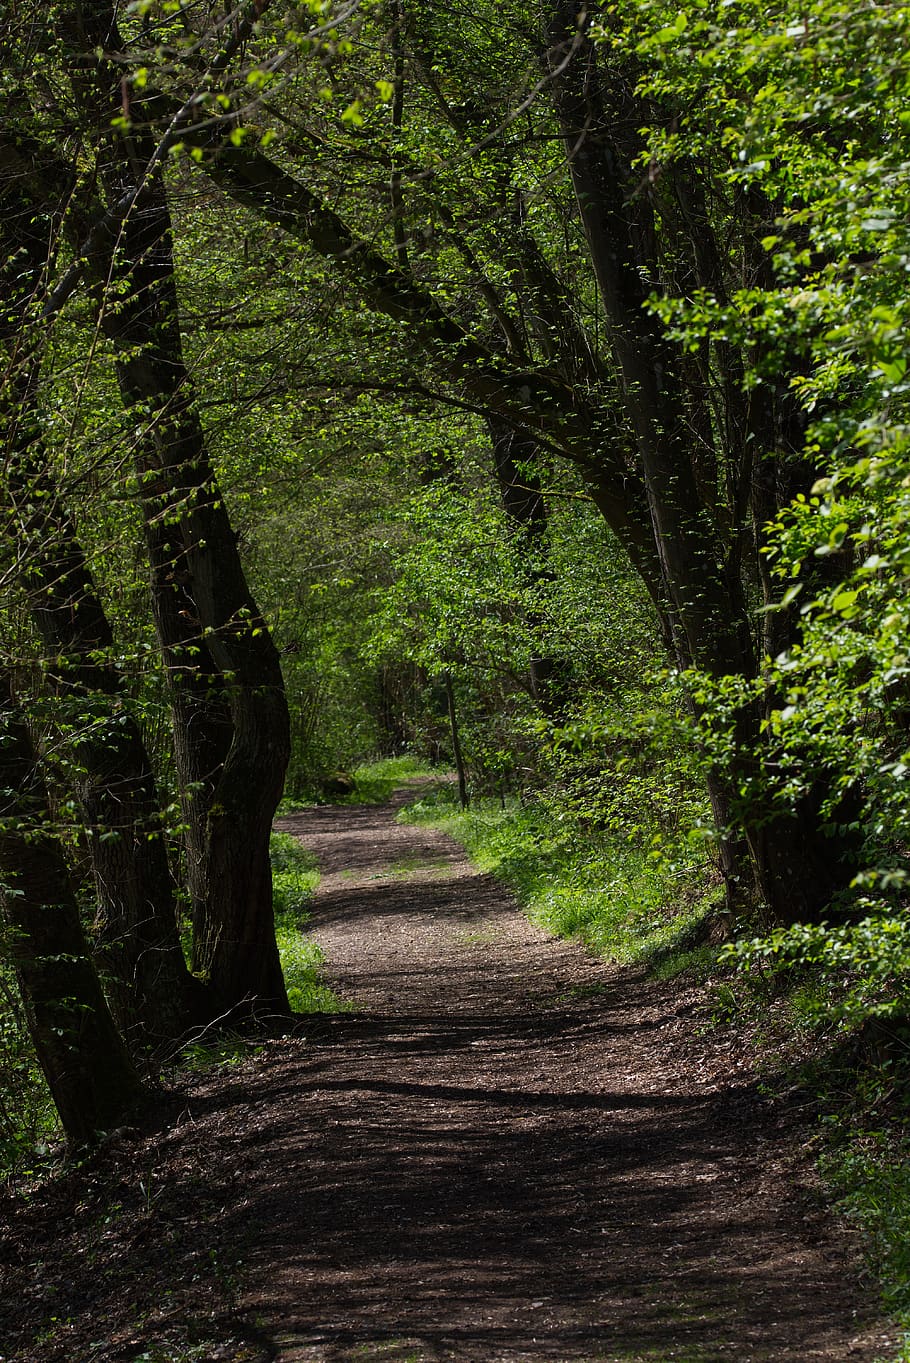 away, trees, nature, forest, path, landscape, avenue, trail, mood, forest path